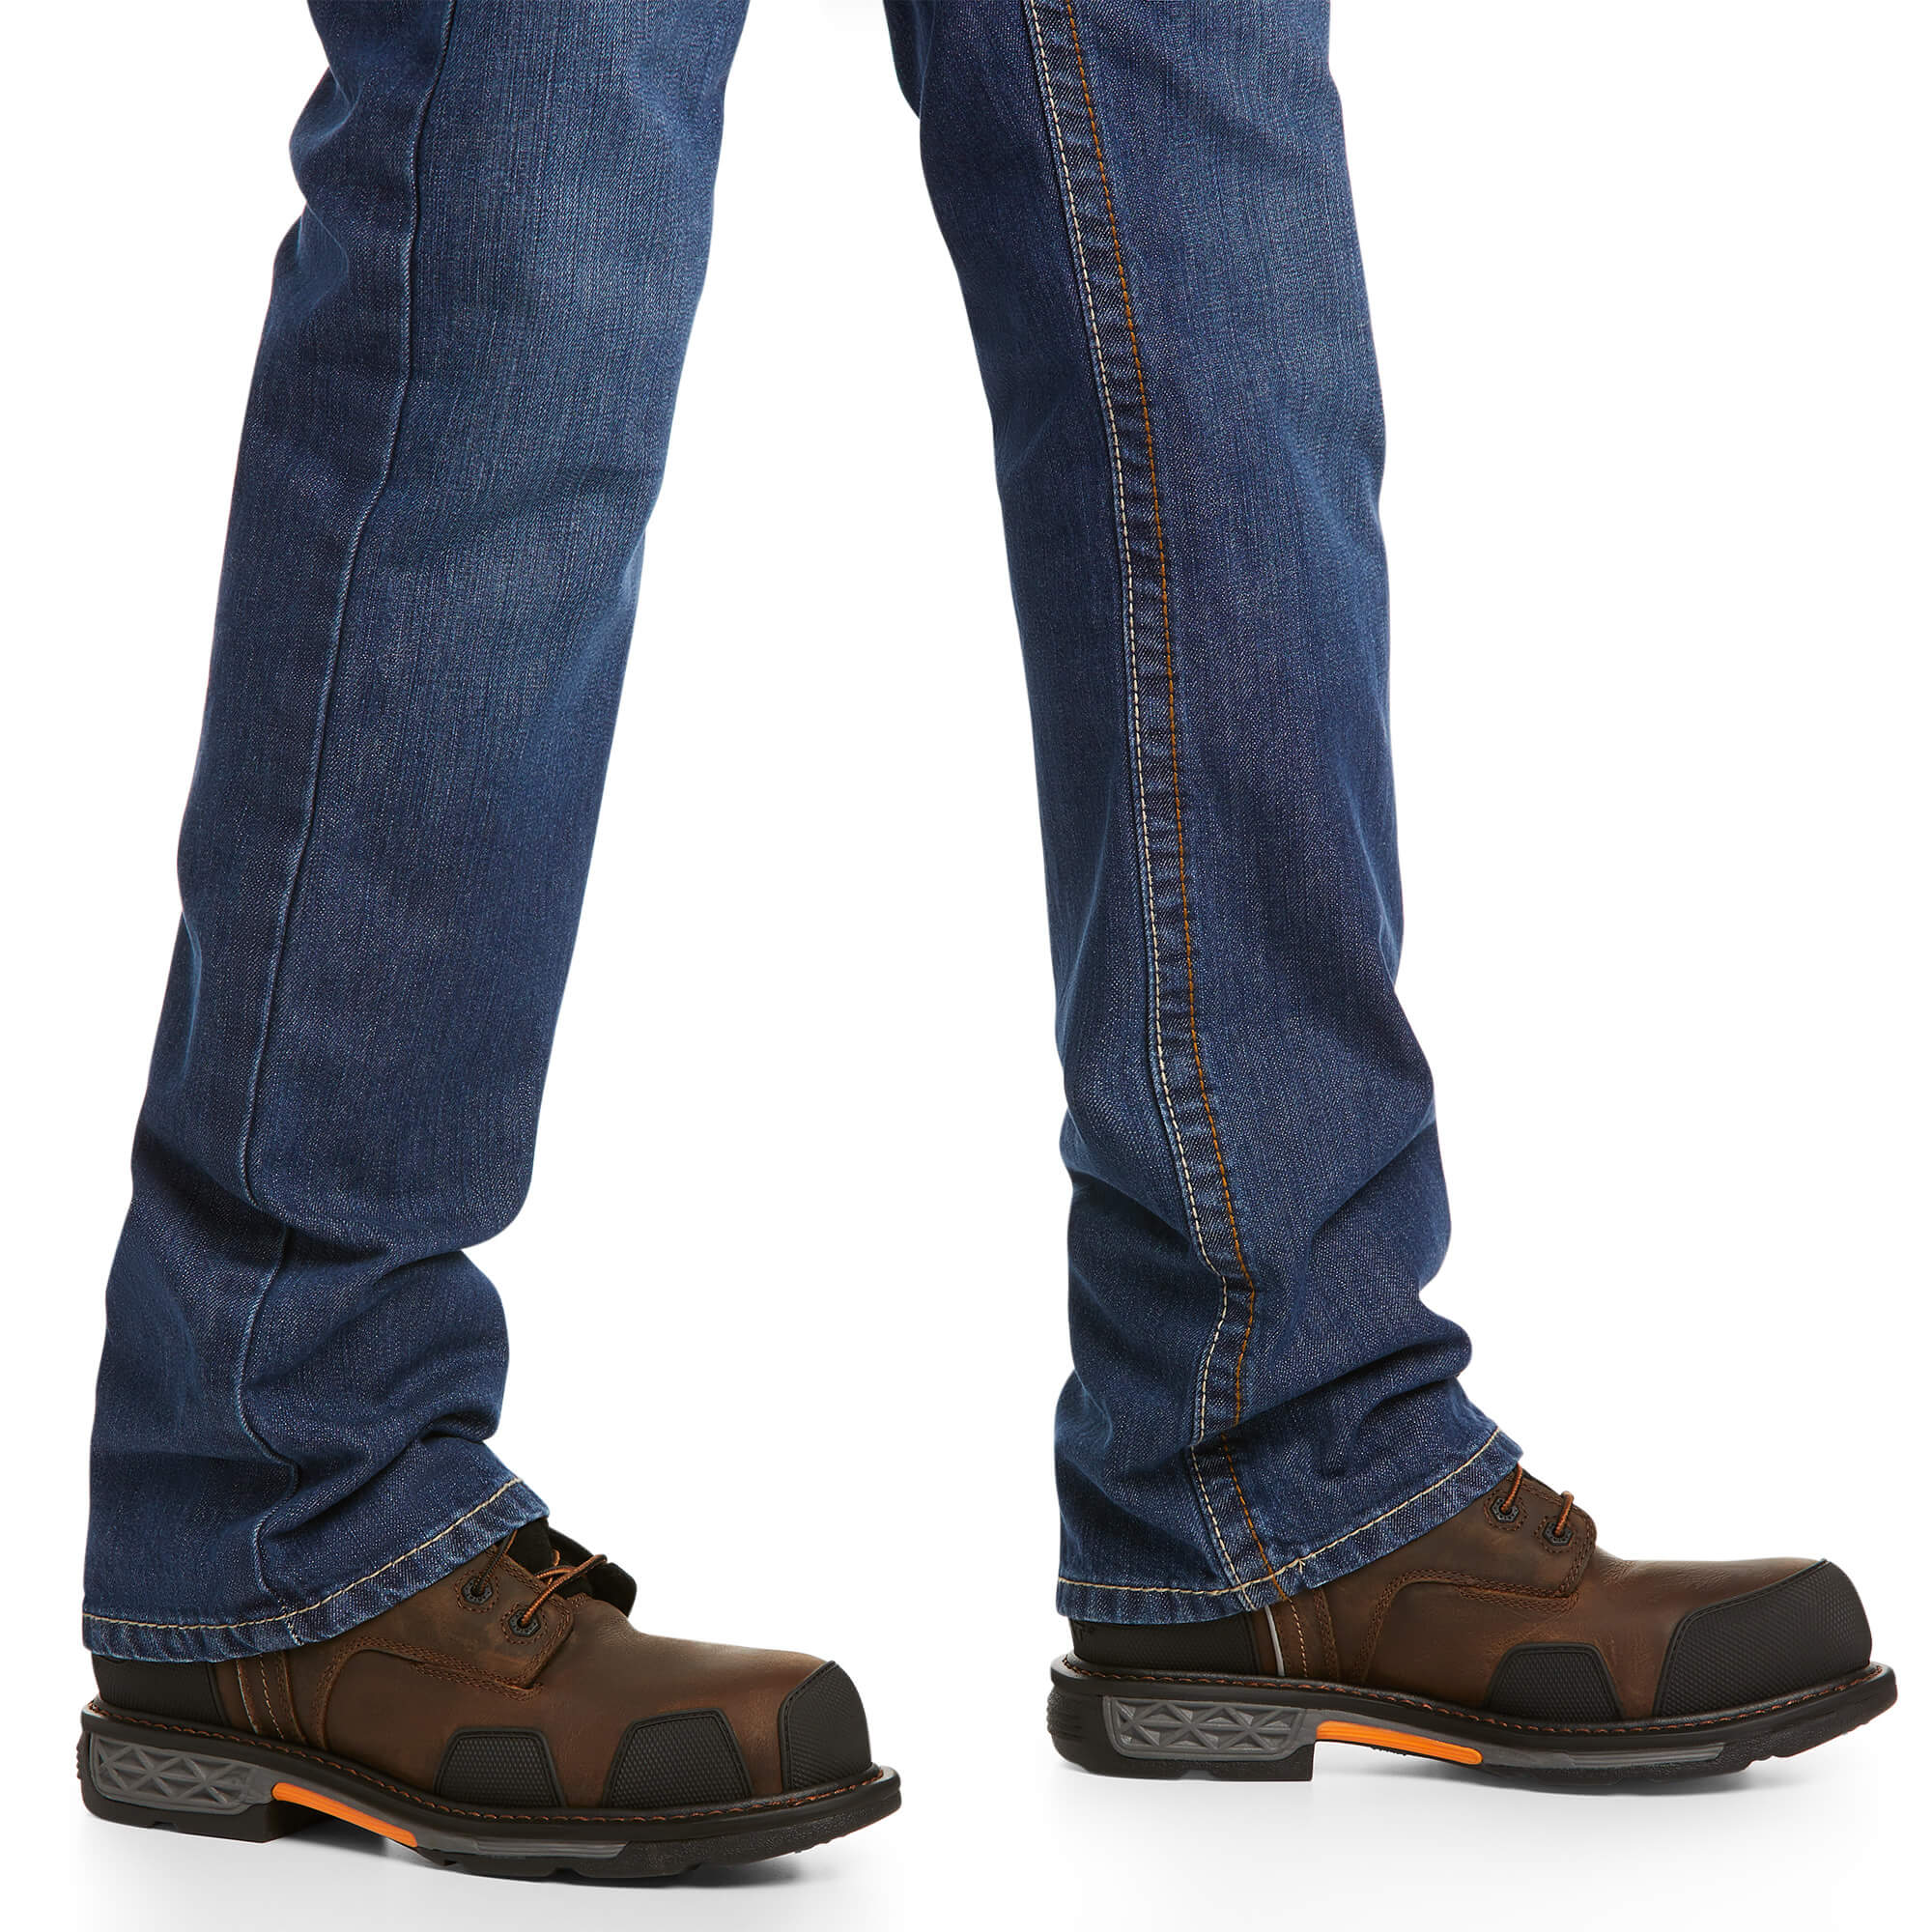 Ariat Flame Resistant M4 Relaxed Boot Cut Jeans from Columbia Safety